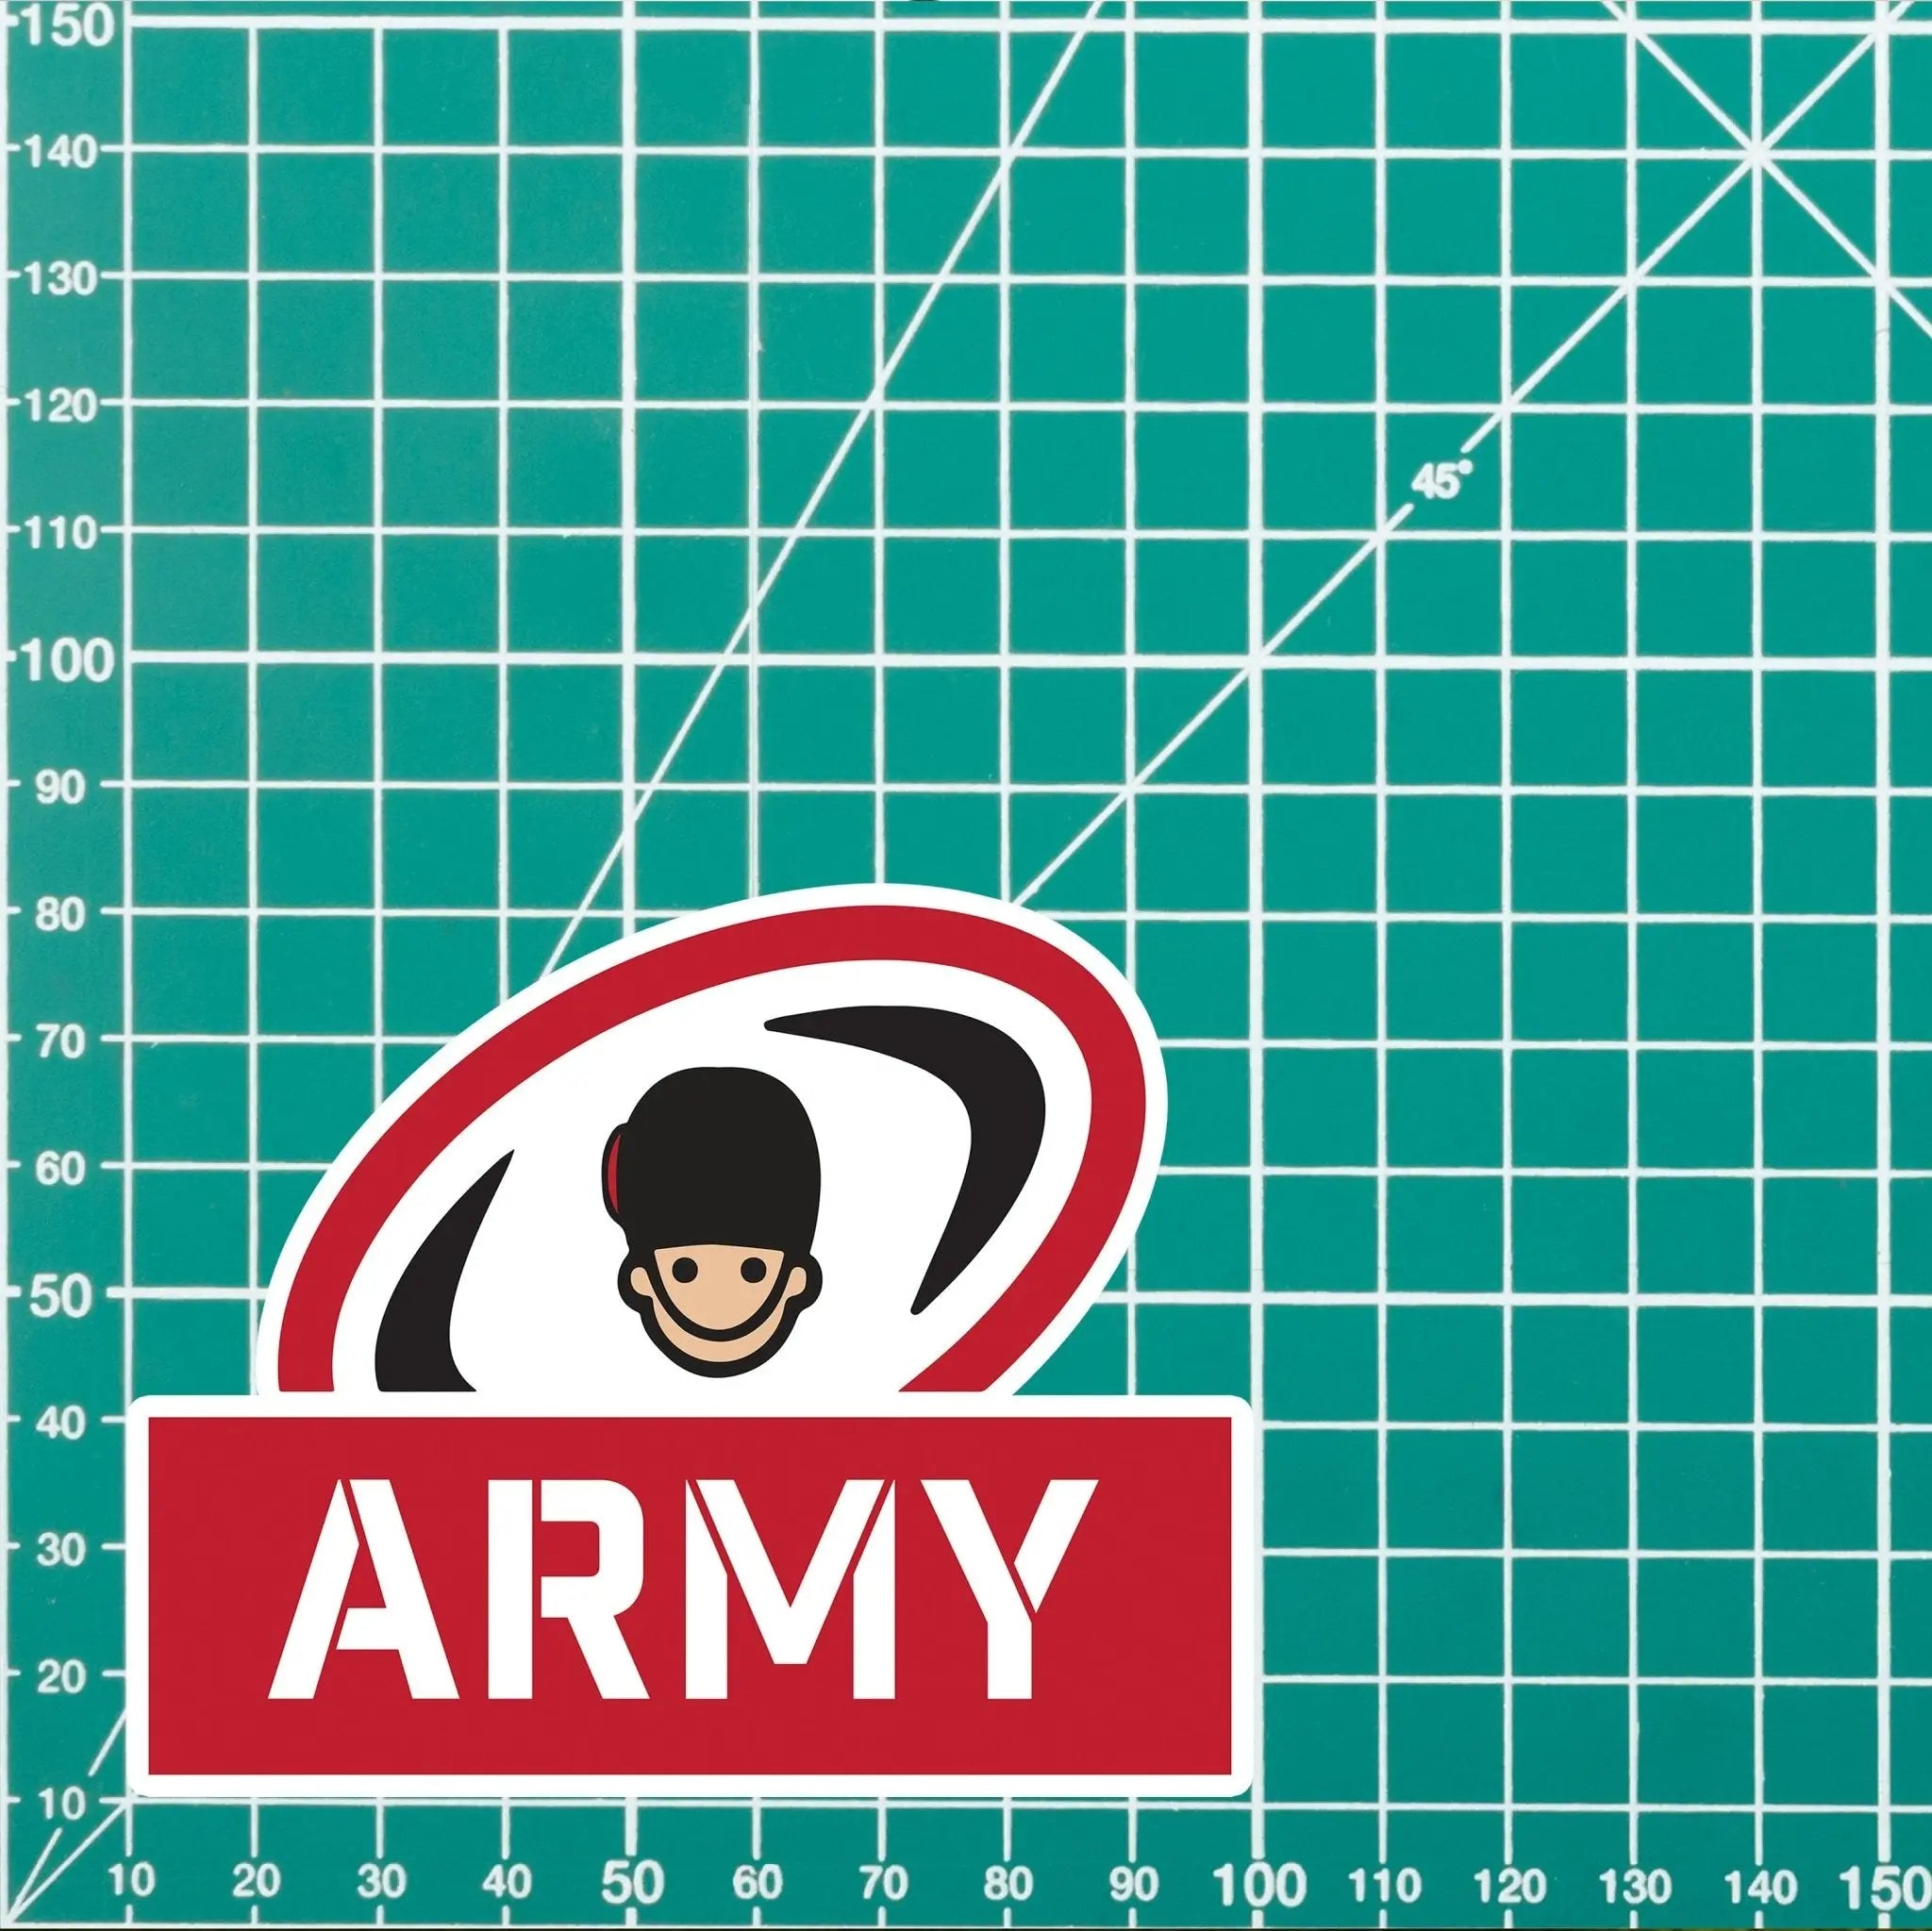 Army Rugby Quality Vinyl Sticker, Army Navy Rugby 100mm wide redplume